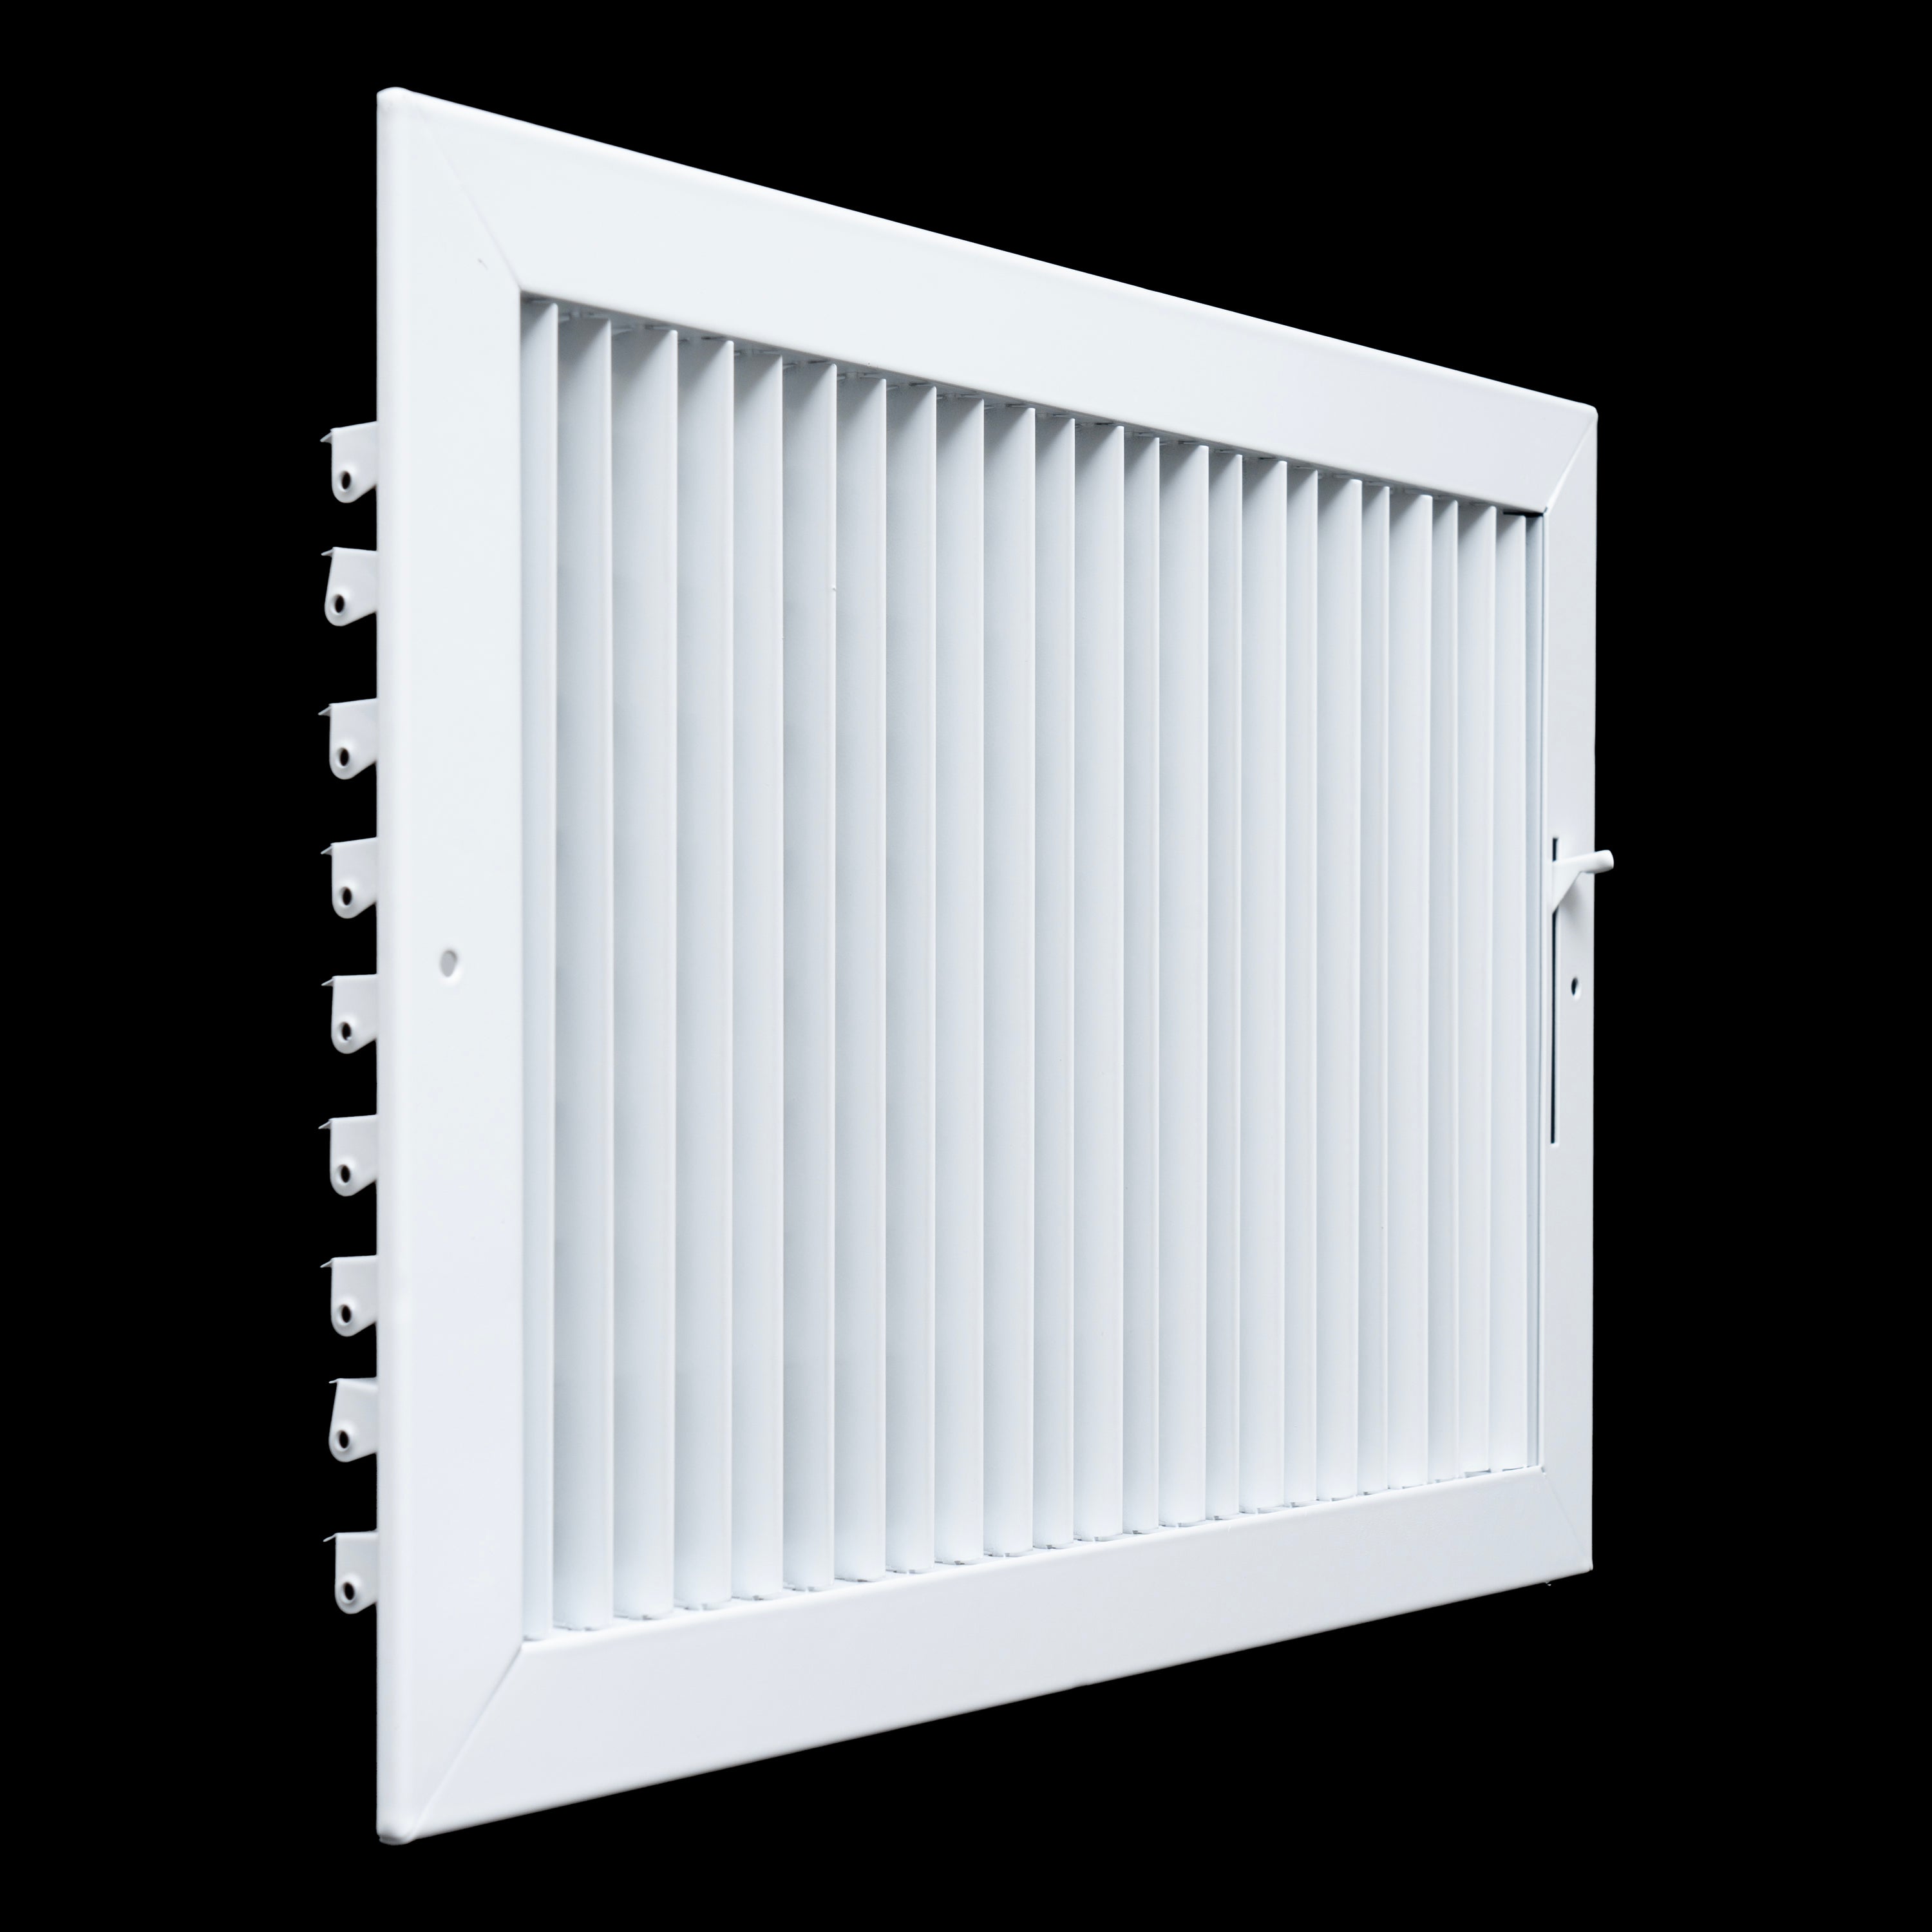 16"W x 10"H  Steel Adjustable Air Supply Grille | Register Vent Cover Grill for Sidewall and Ceiling | White | Outer Dimensions: 17.75"W X 11.75"H for 16x10 Duct Opening